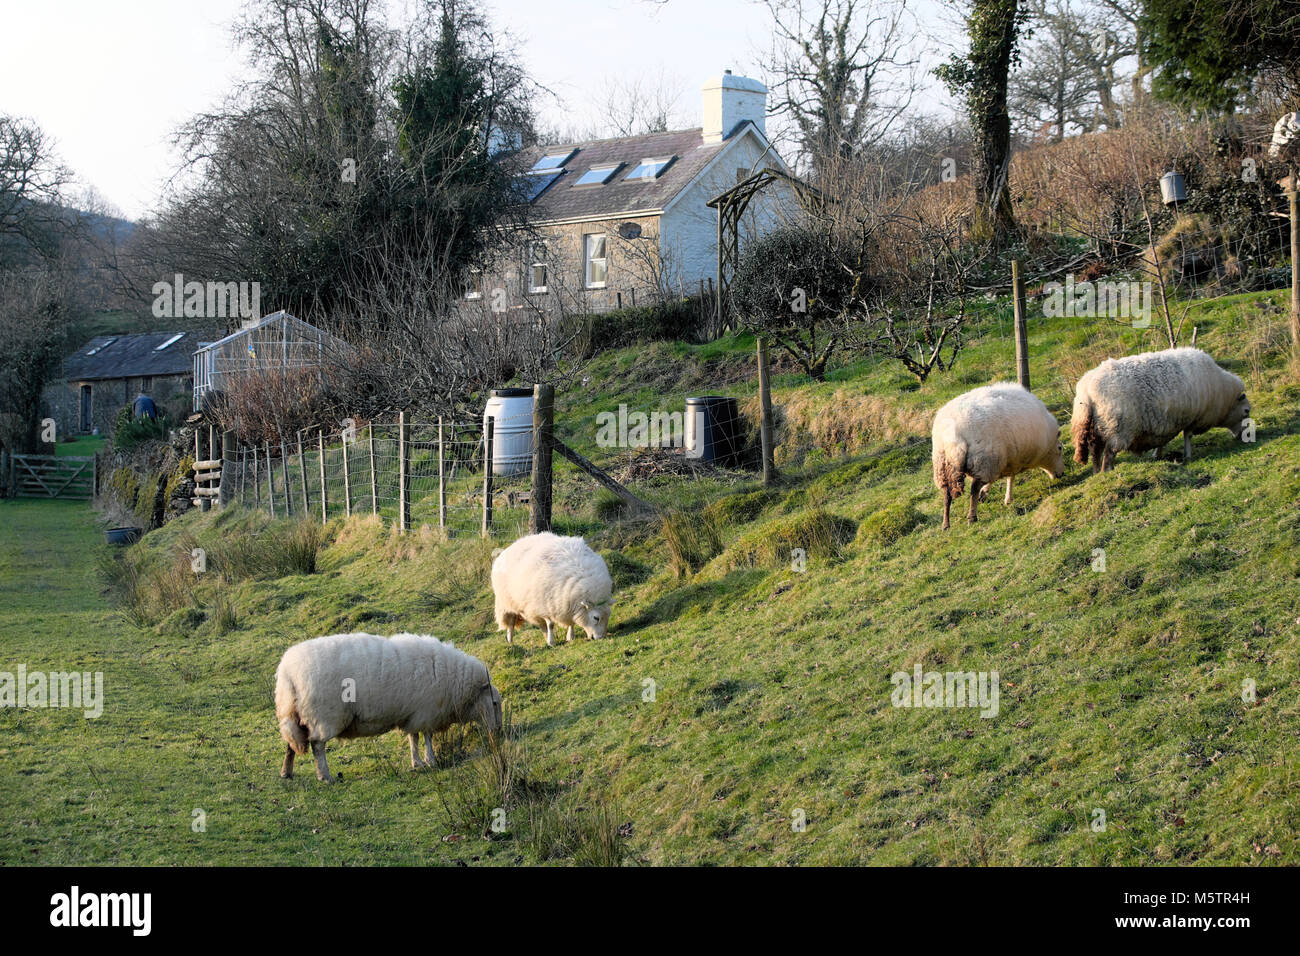 Sheep grazing in winter on land near a rural garden, house and greenhouse on a smallholding in the Welsh countryside Wales UK  KATHY DEWITT Stock Photo